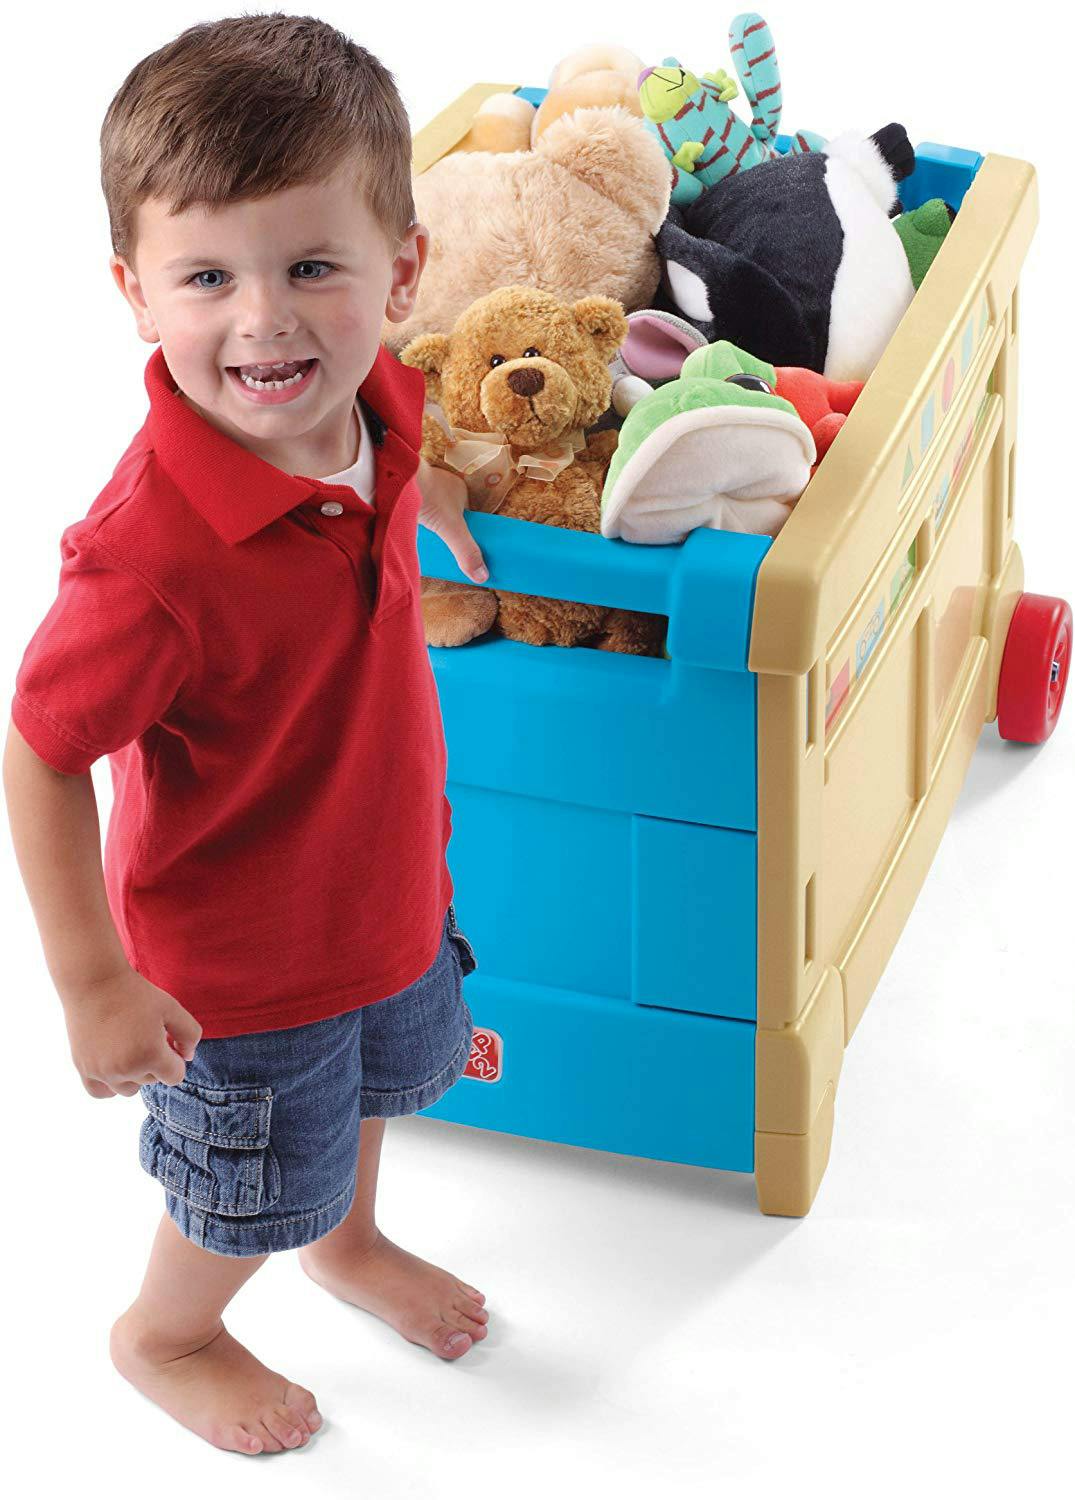 where to buy a toy box near me